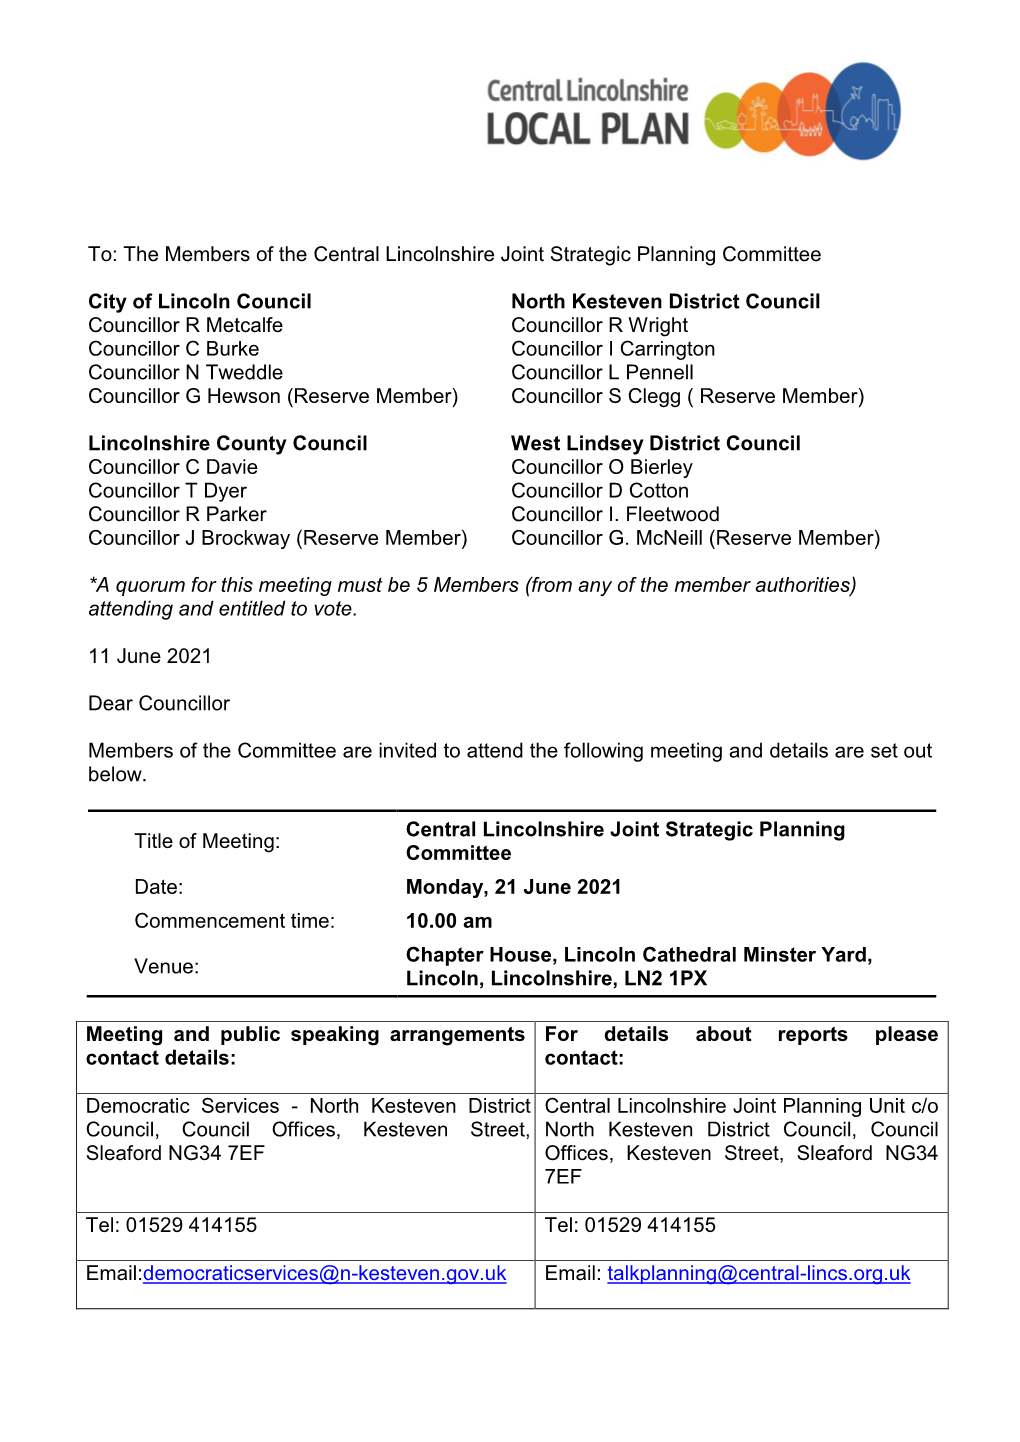 (Public Pack)Agenda Document for Central Lincolnshire Joint Strategic